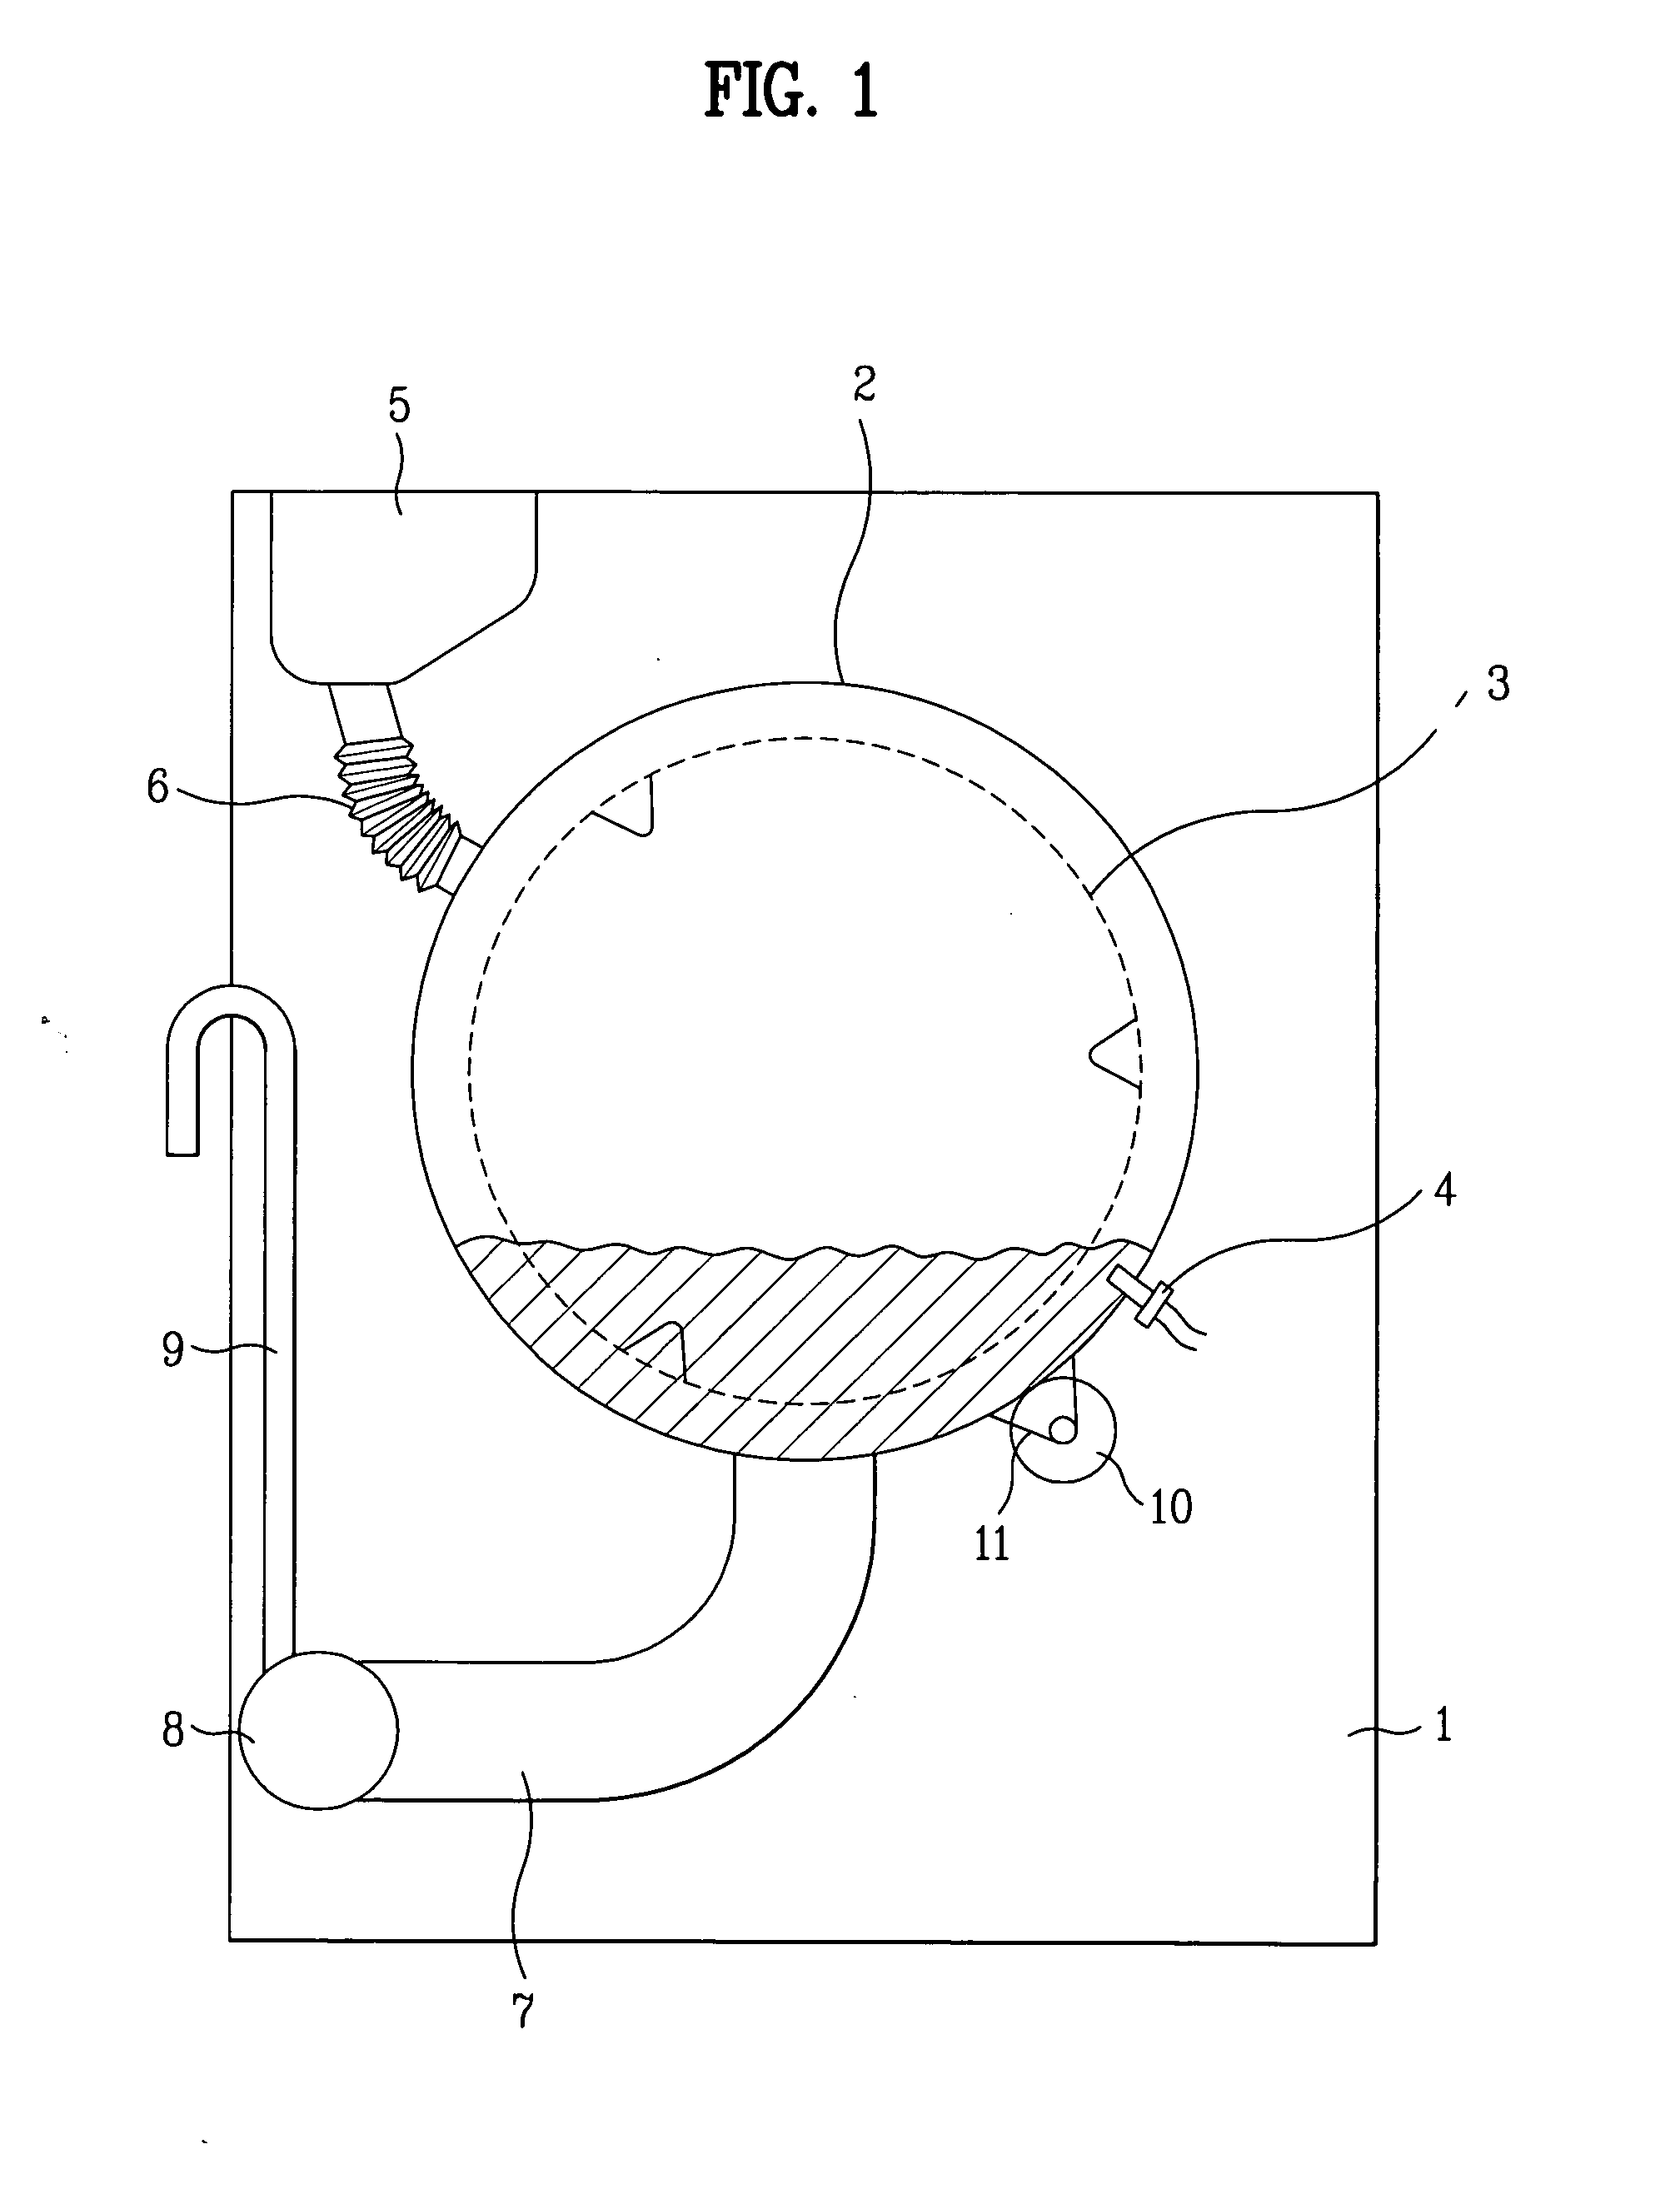 Washer and method of determining load weight for same